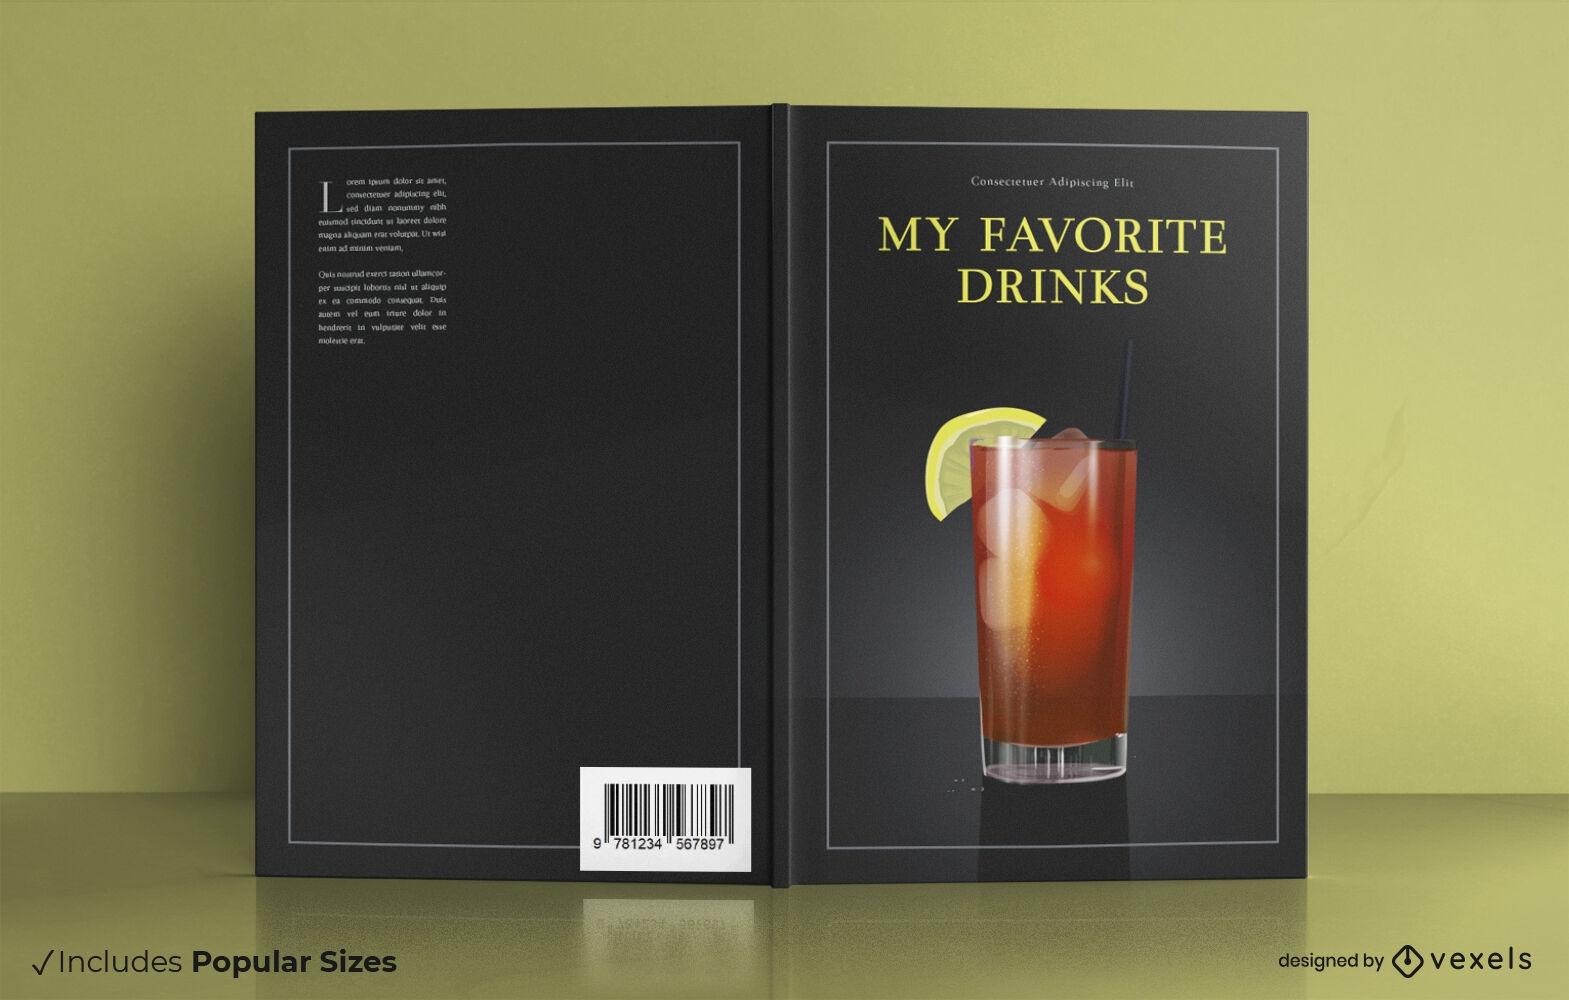 My favorite drinks book cover design